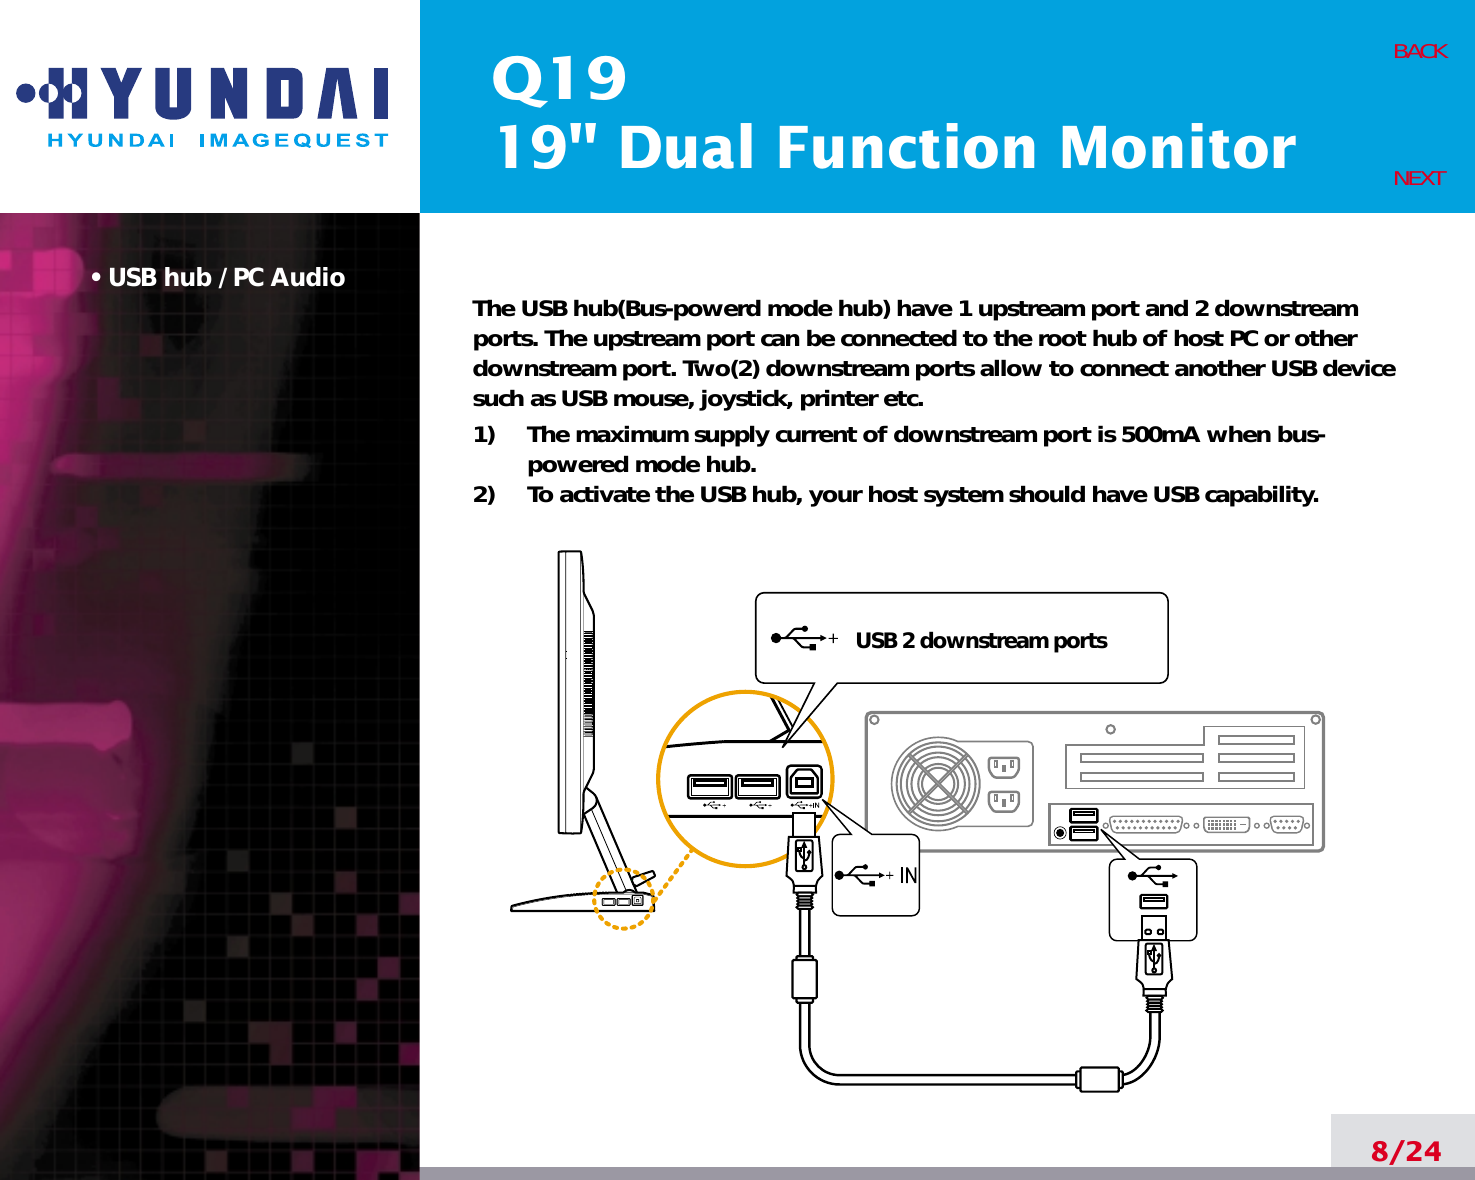 Q1919&quot; Dual Function Monitor• USB hub / PC Audio The USB hub(Bus-powerd mode hub) have 1 upstream port and 2 downstreamports. The upstream port can be connected to the root hub of host PC or otherdownstream port. Two(2) downstream ports allow to connect another USB devicesuch as USB mouse, joystick, printer etc.1)     The maximum supply current of downstream port is 500mA when bus-powered mode hub.2)     To activate the USB hub, your host system should have USB capability.8/24BACKNEXTUSB 2 downstream ports